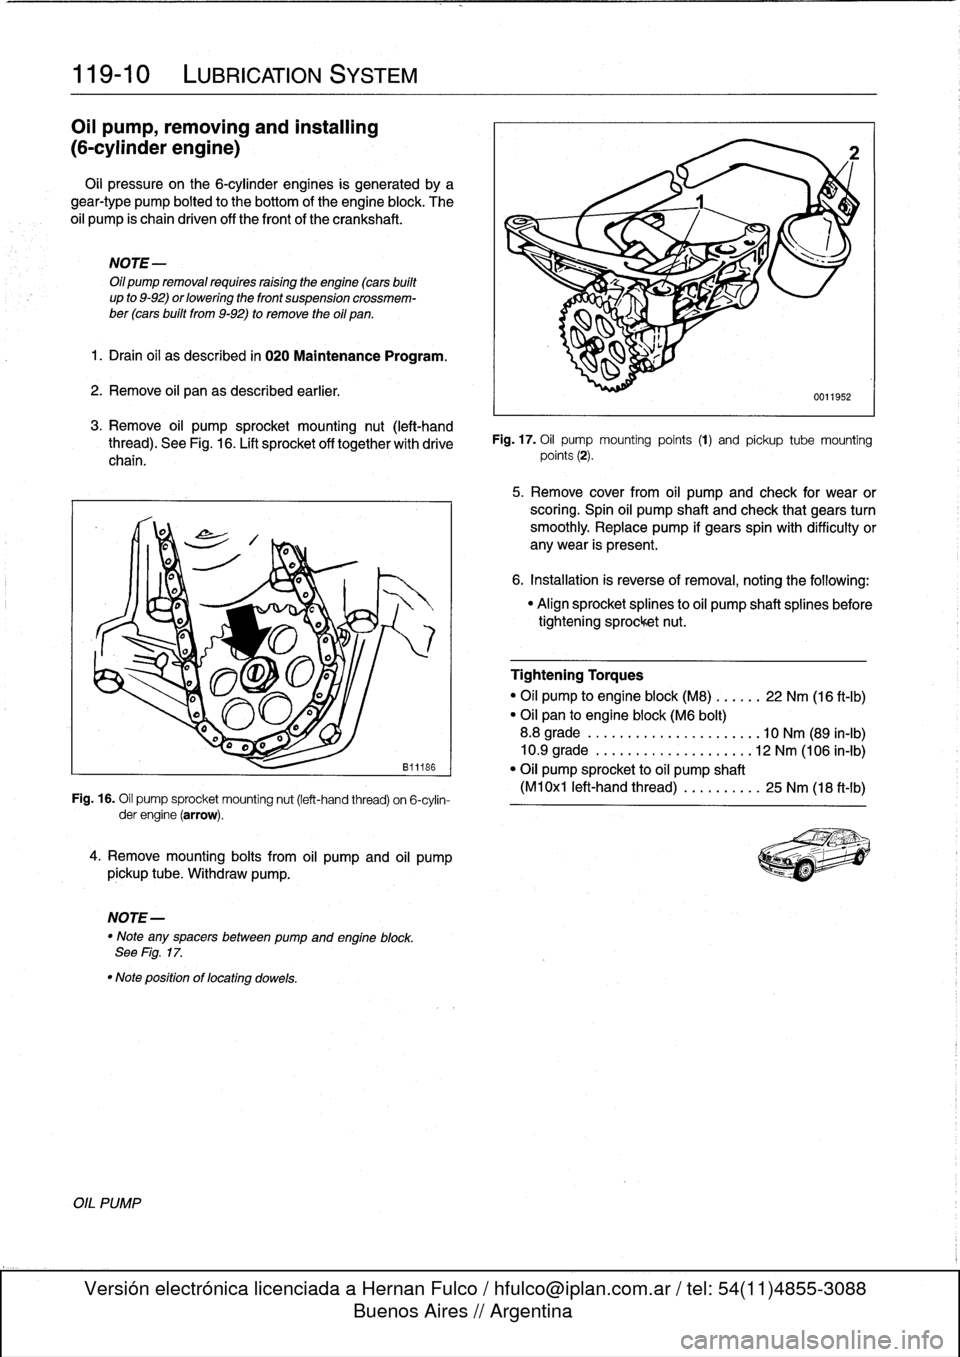 BMW 318i 1997 E36 User Guide 
119-
1
0

	

LUBRICATION
SYSTEM

Oil
pump,
removing
and
installing

(6-cylinder
engine)

Oil
pressure
on
the
6-cylinder
engines
is
generated
by
a
gear-type
pump
bolted
to
the
bottom
of
the
engine
blo